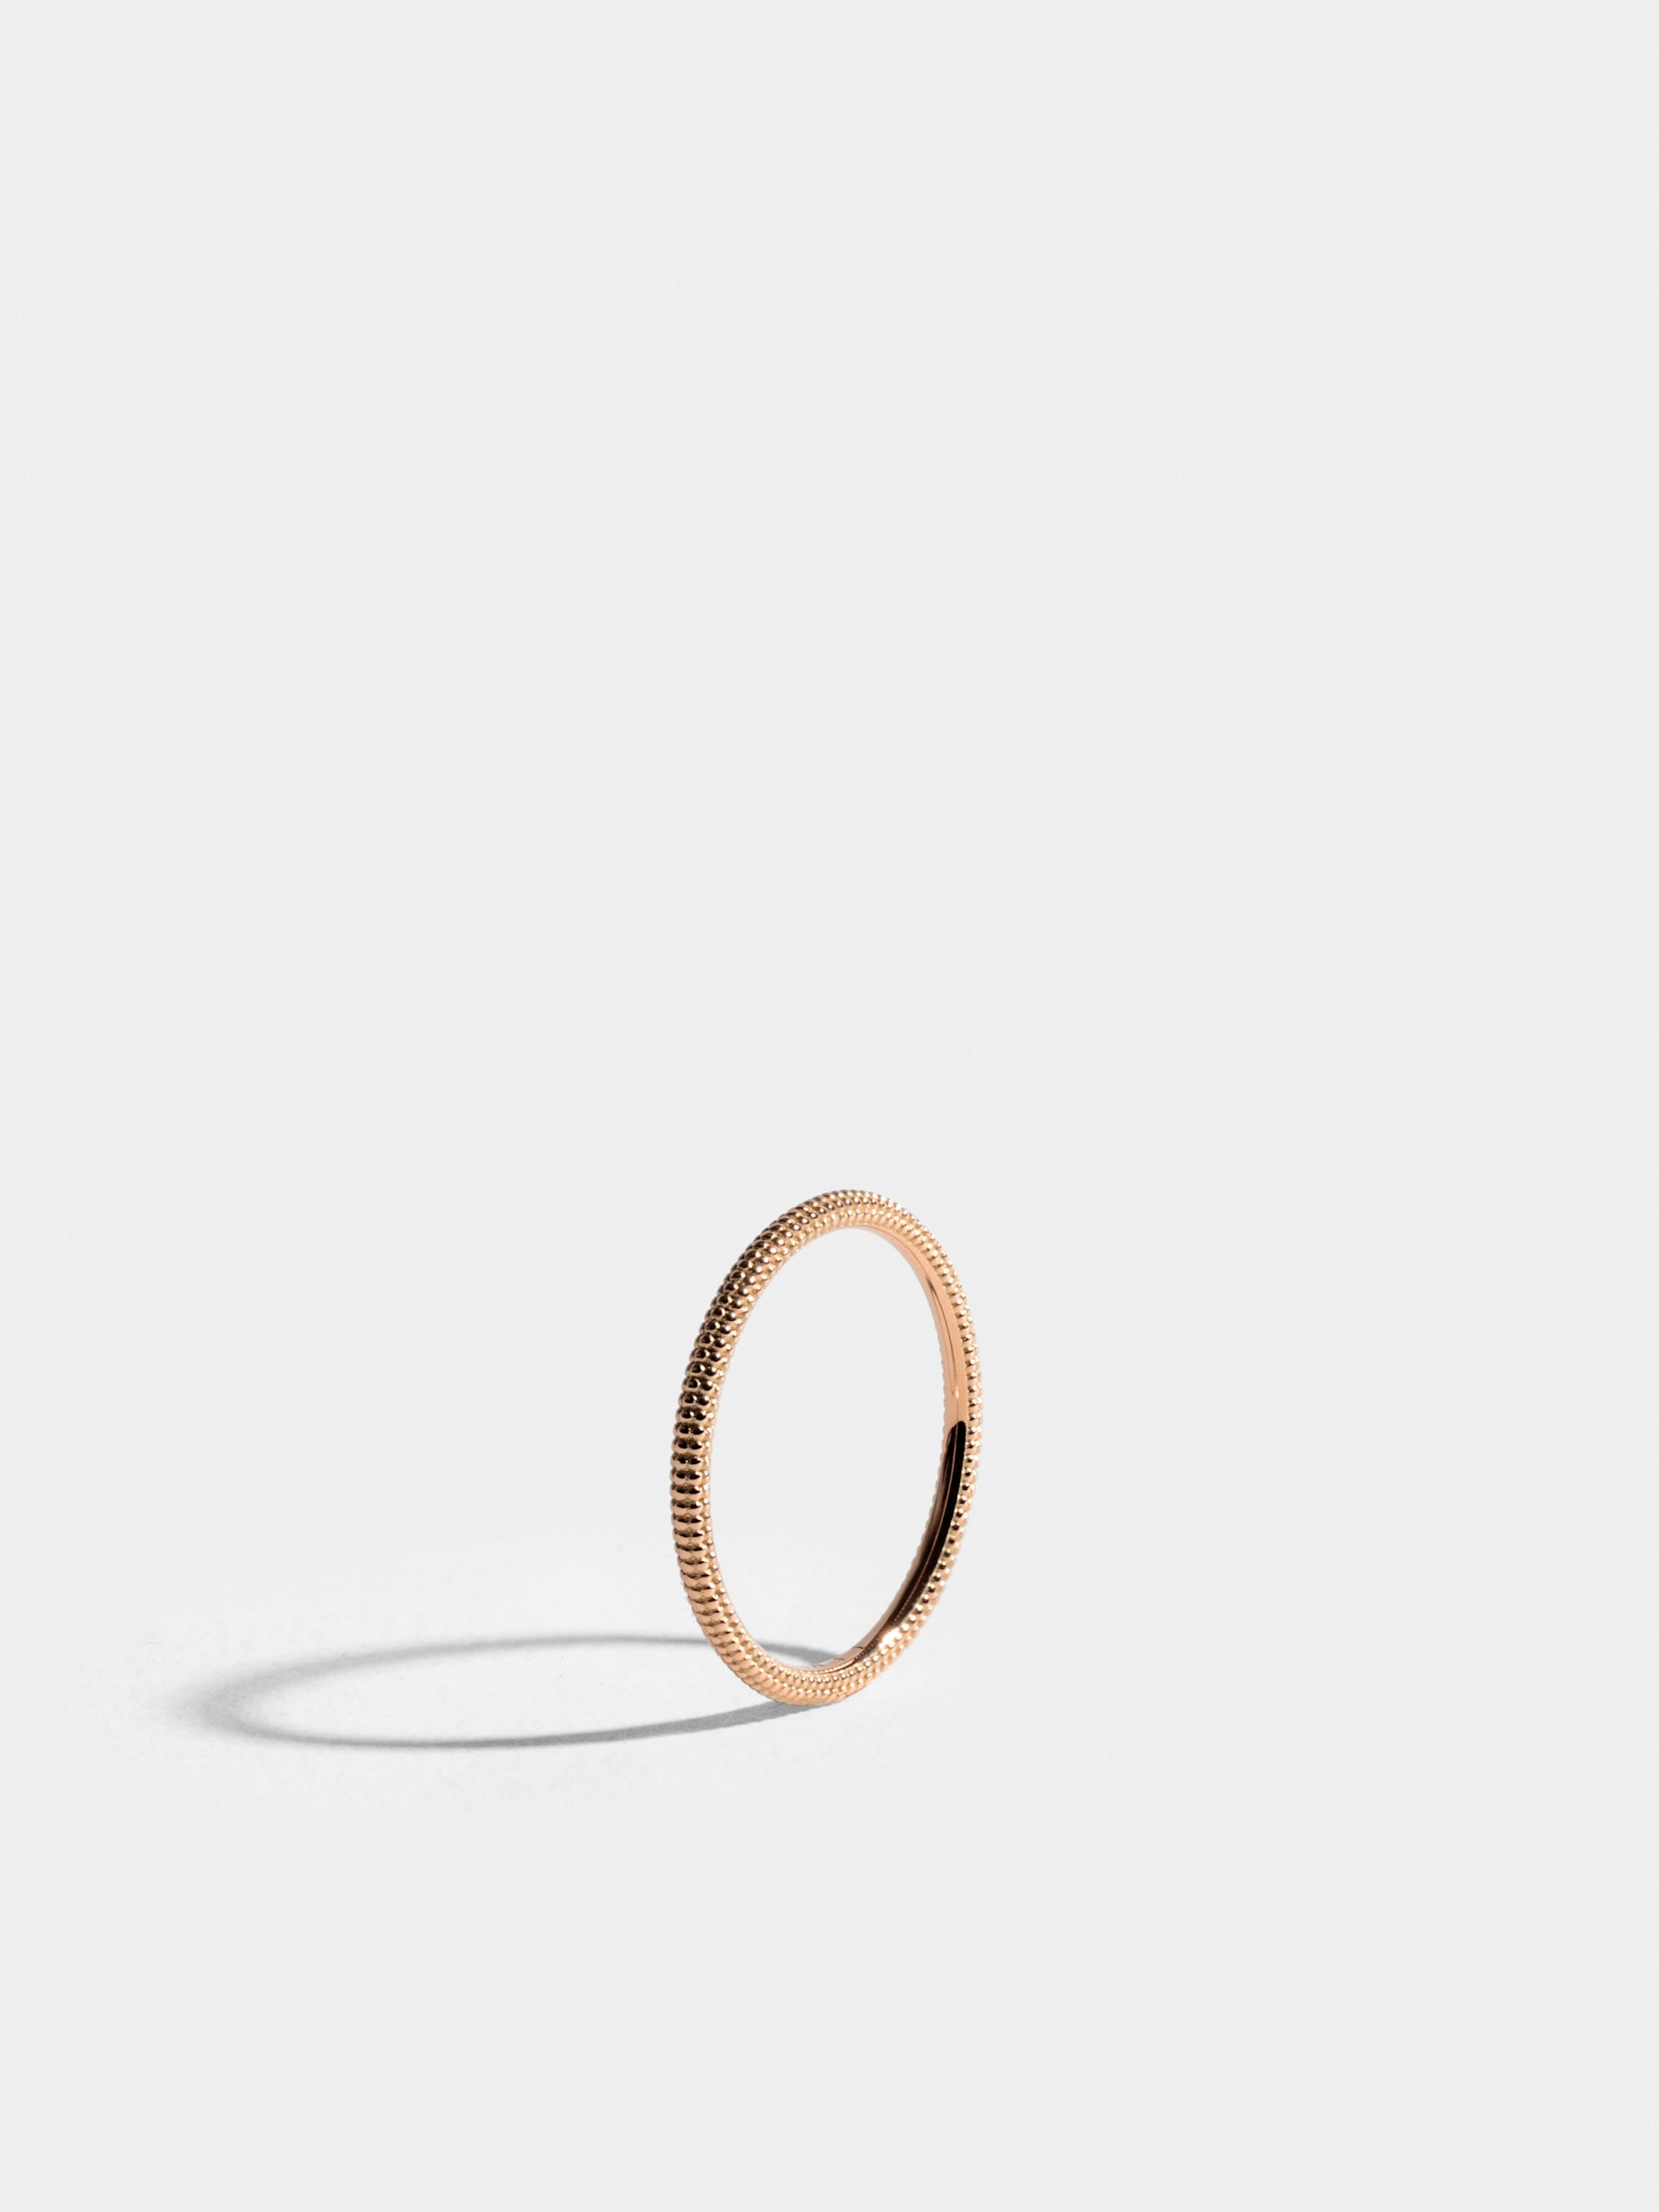 Anagramme "millegrains" ring